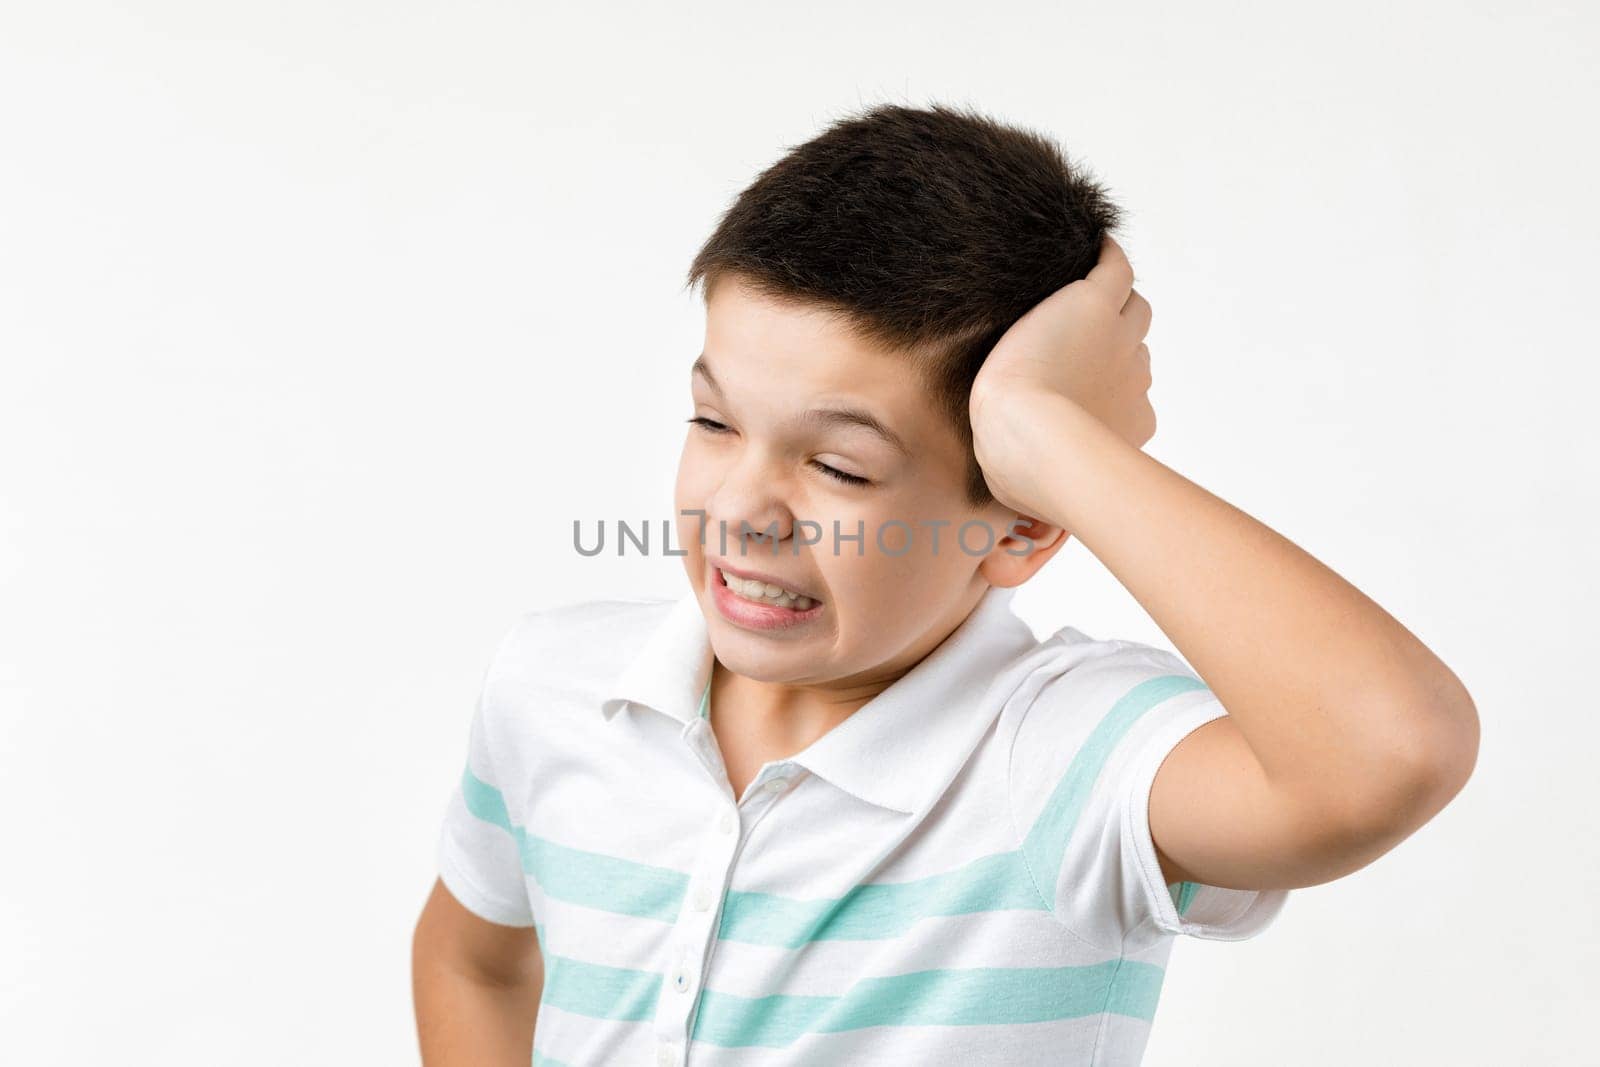 Cute little child boy in striped t-shirt thinks about something on white background. Human emotions and facial expression